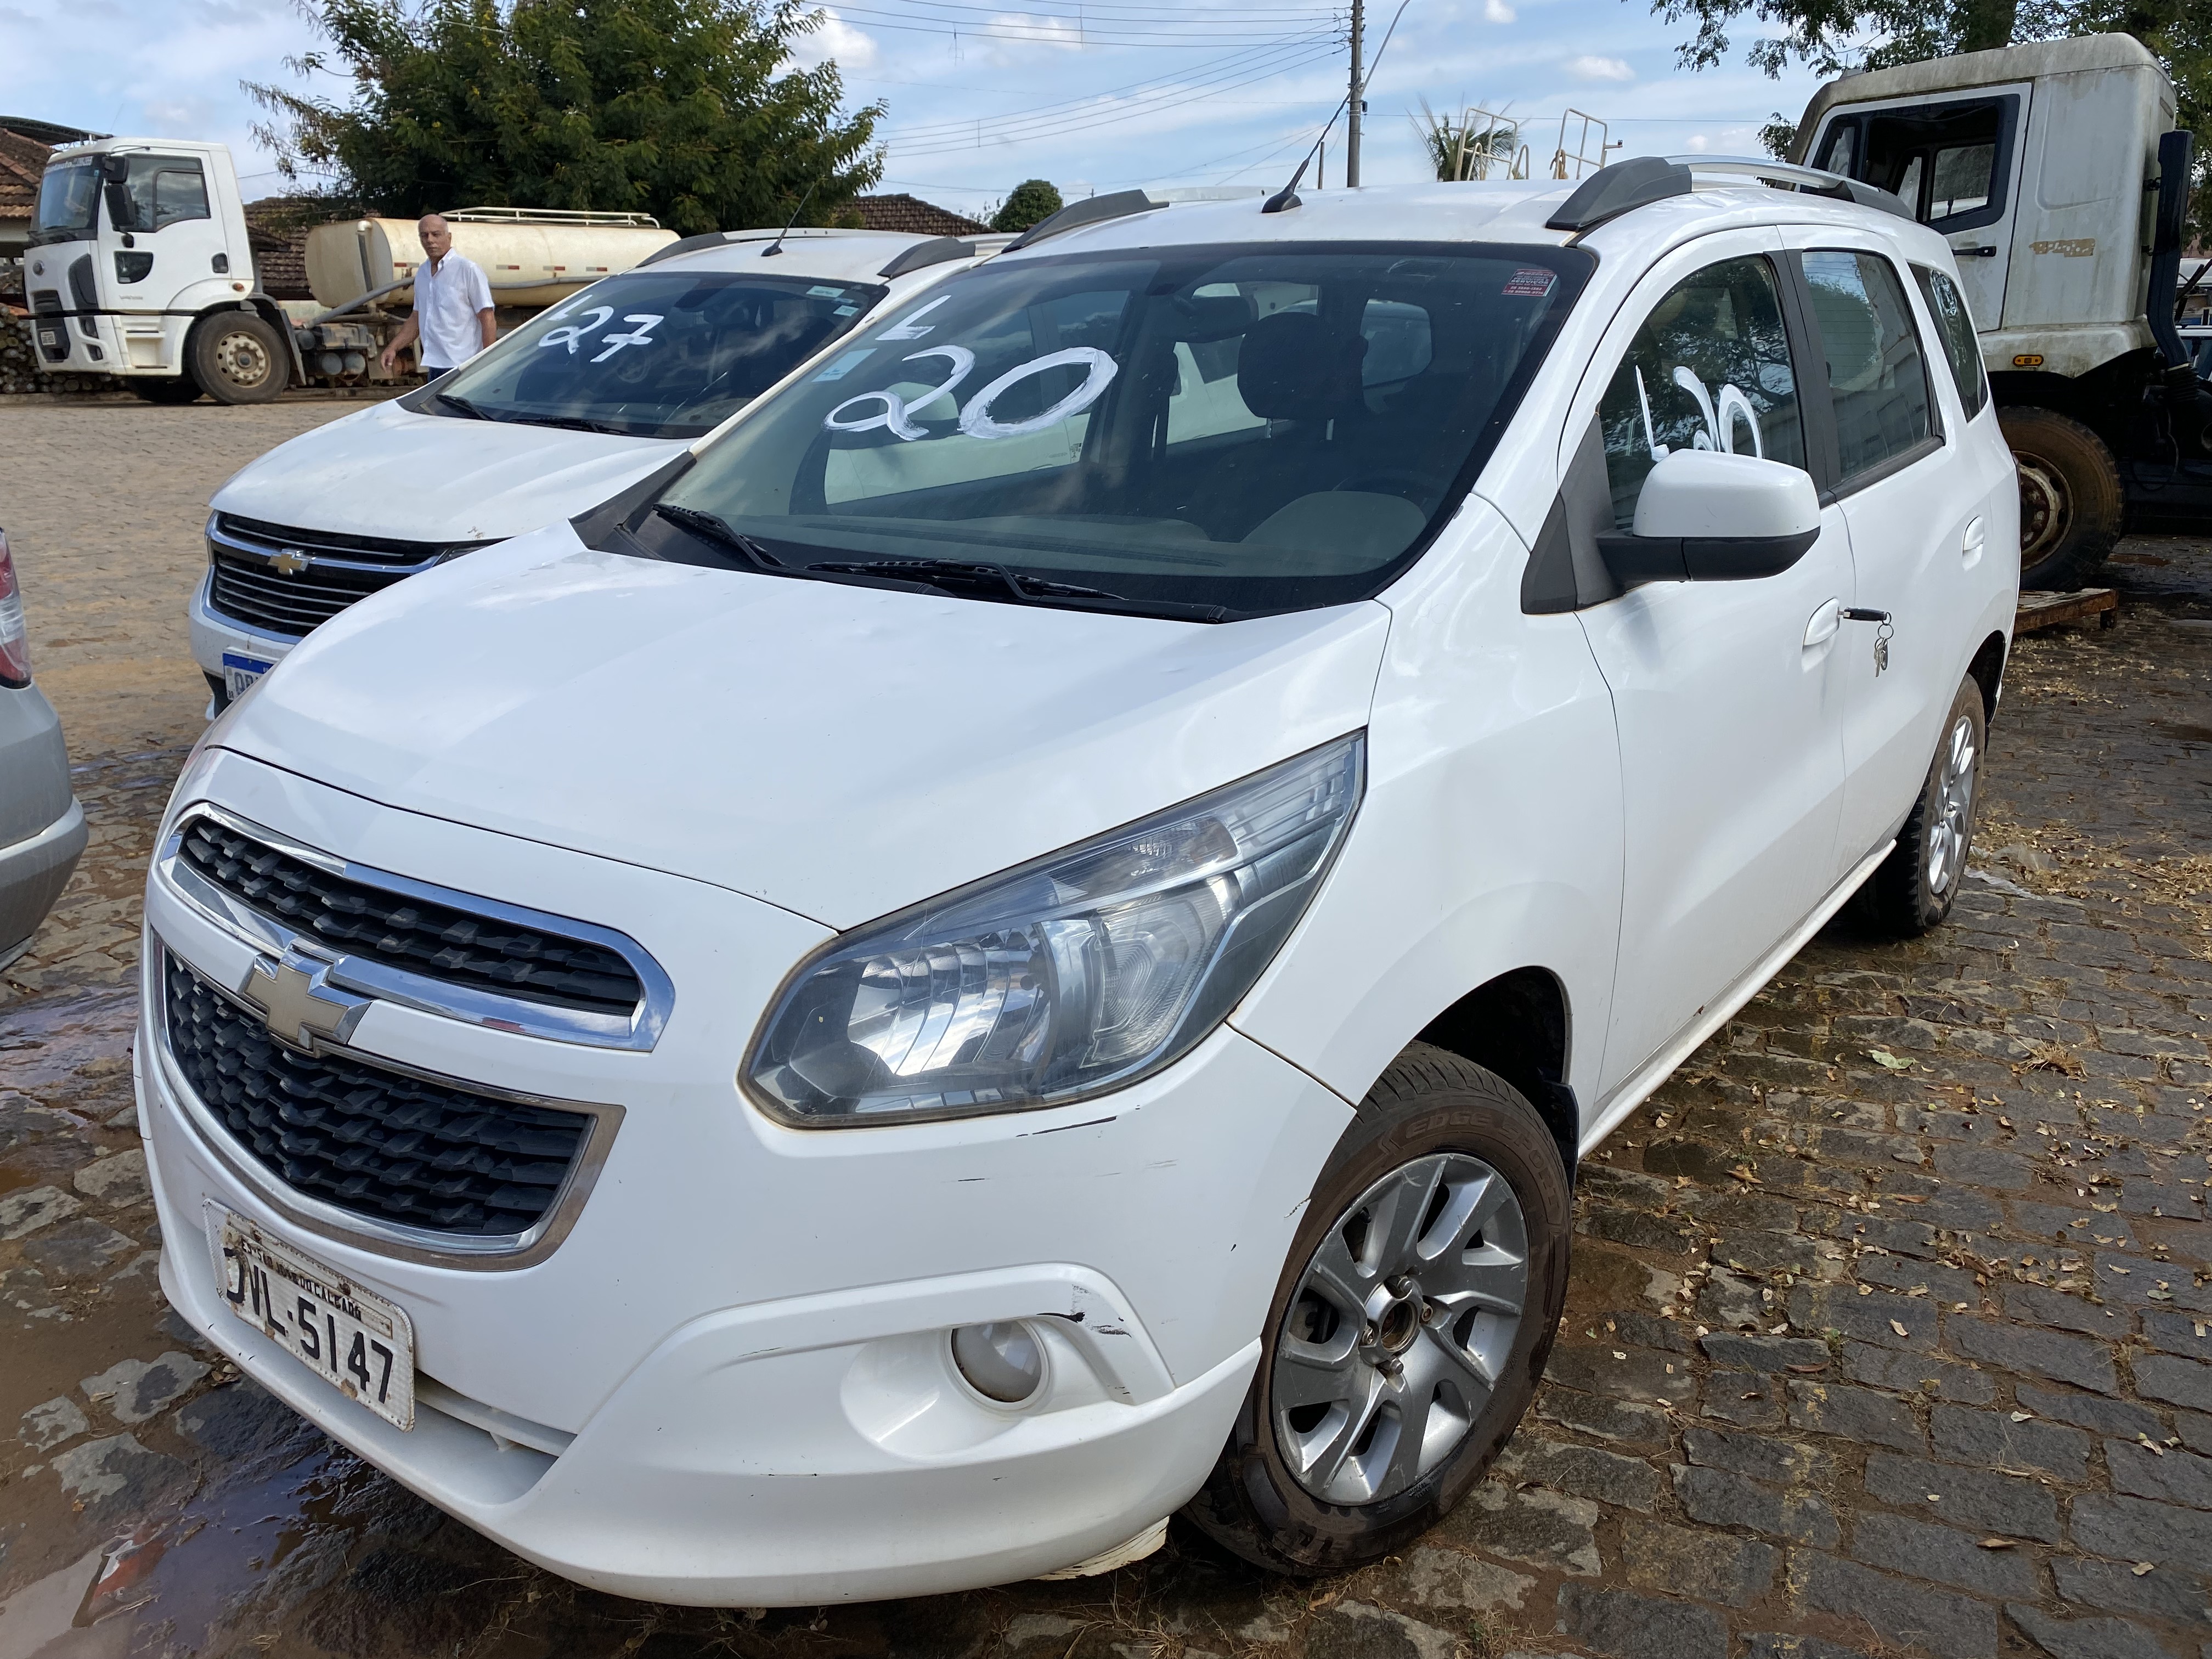 CHEVROLET/SPIN - ANO:15/16